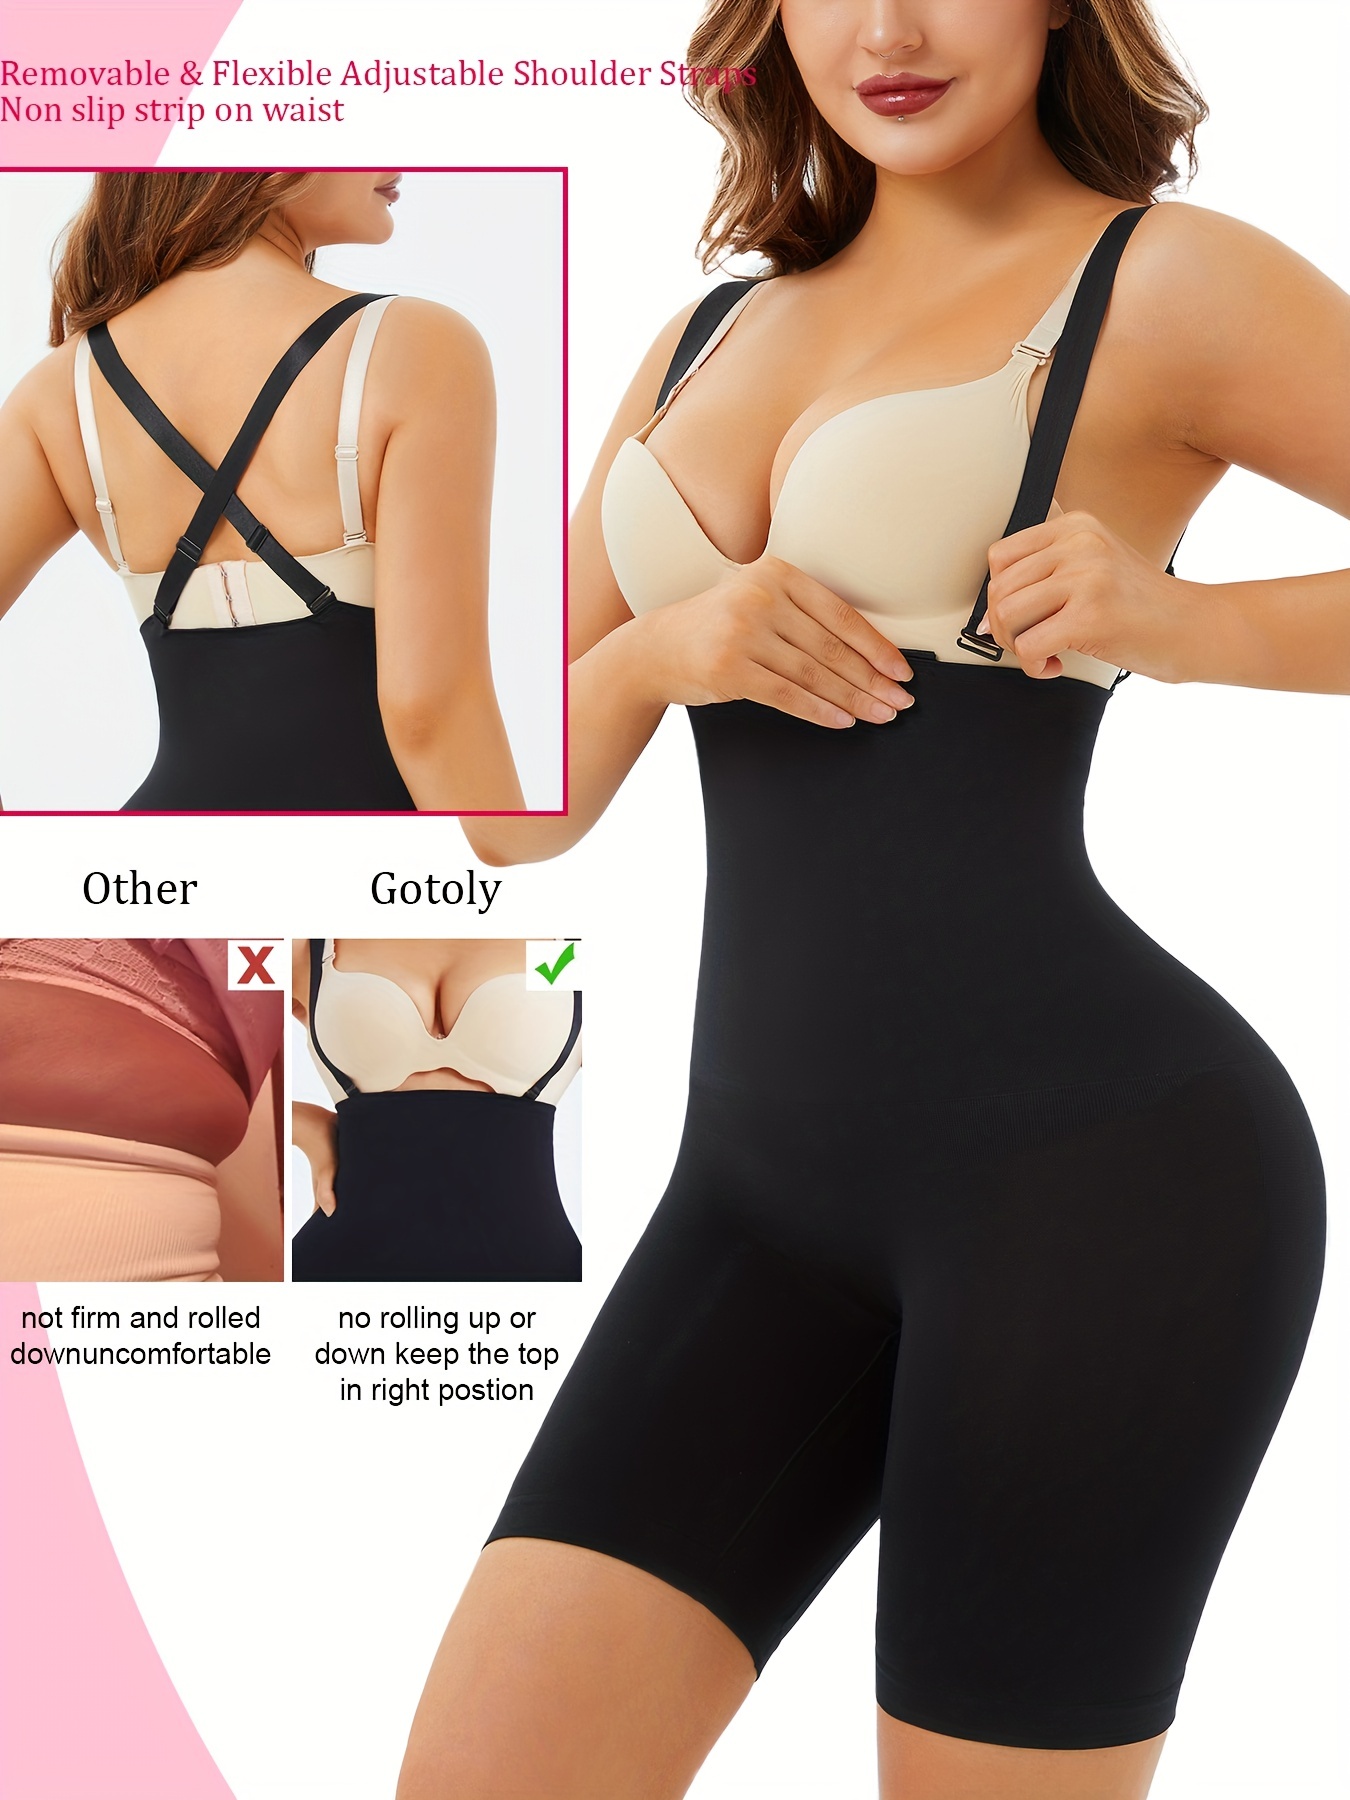 Best Shapewear for Tummy Control and Waist Shaping Shorts